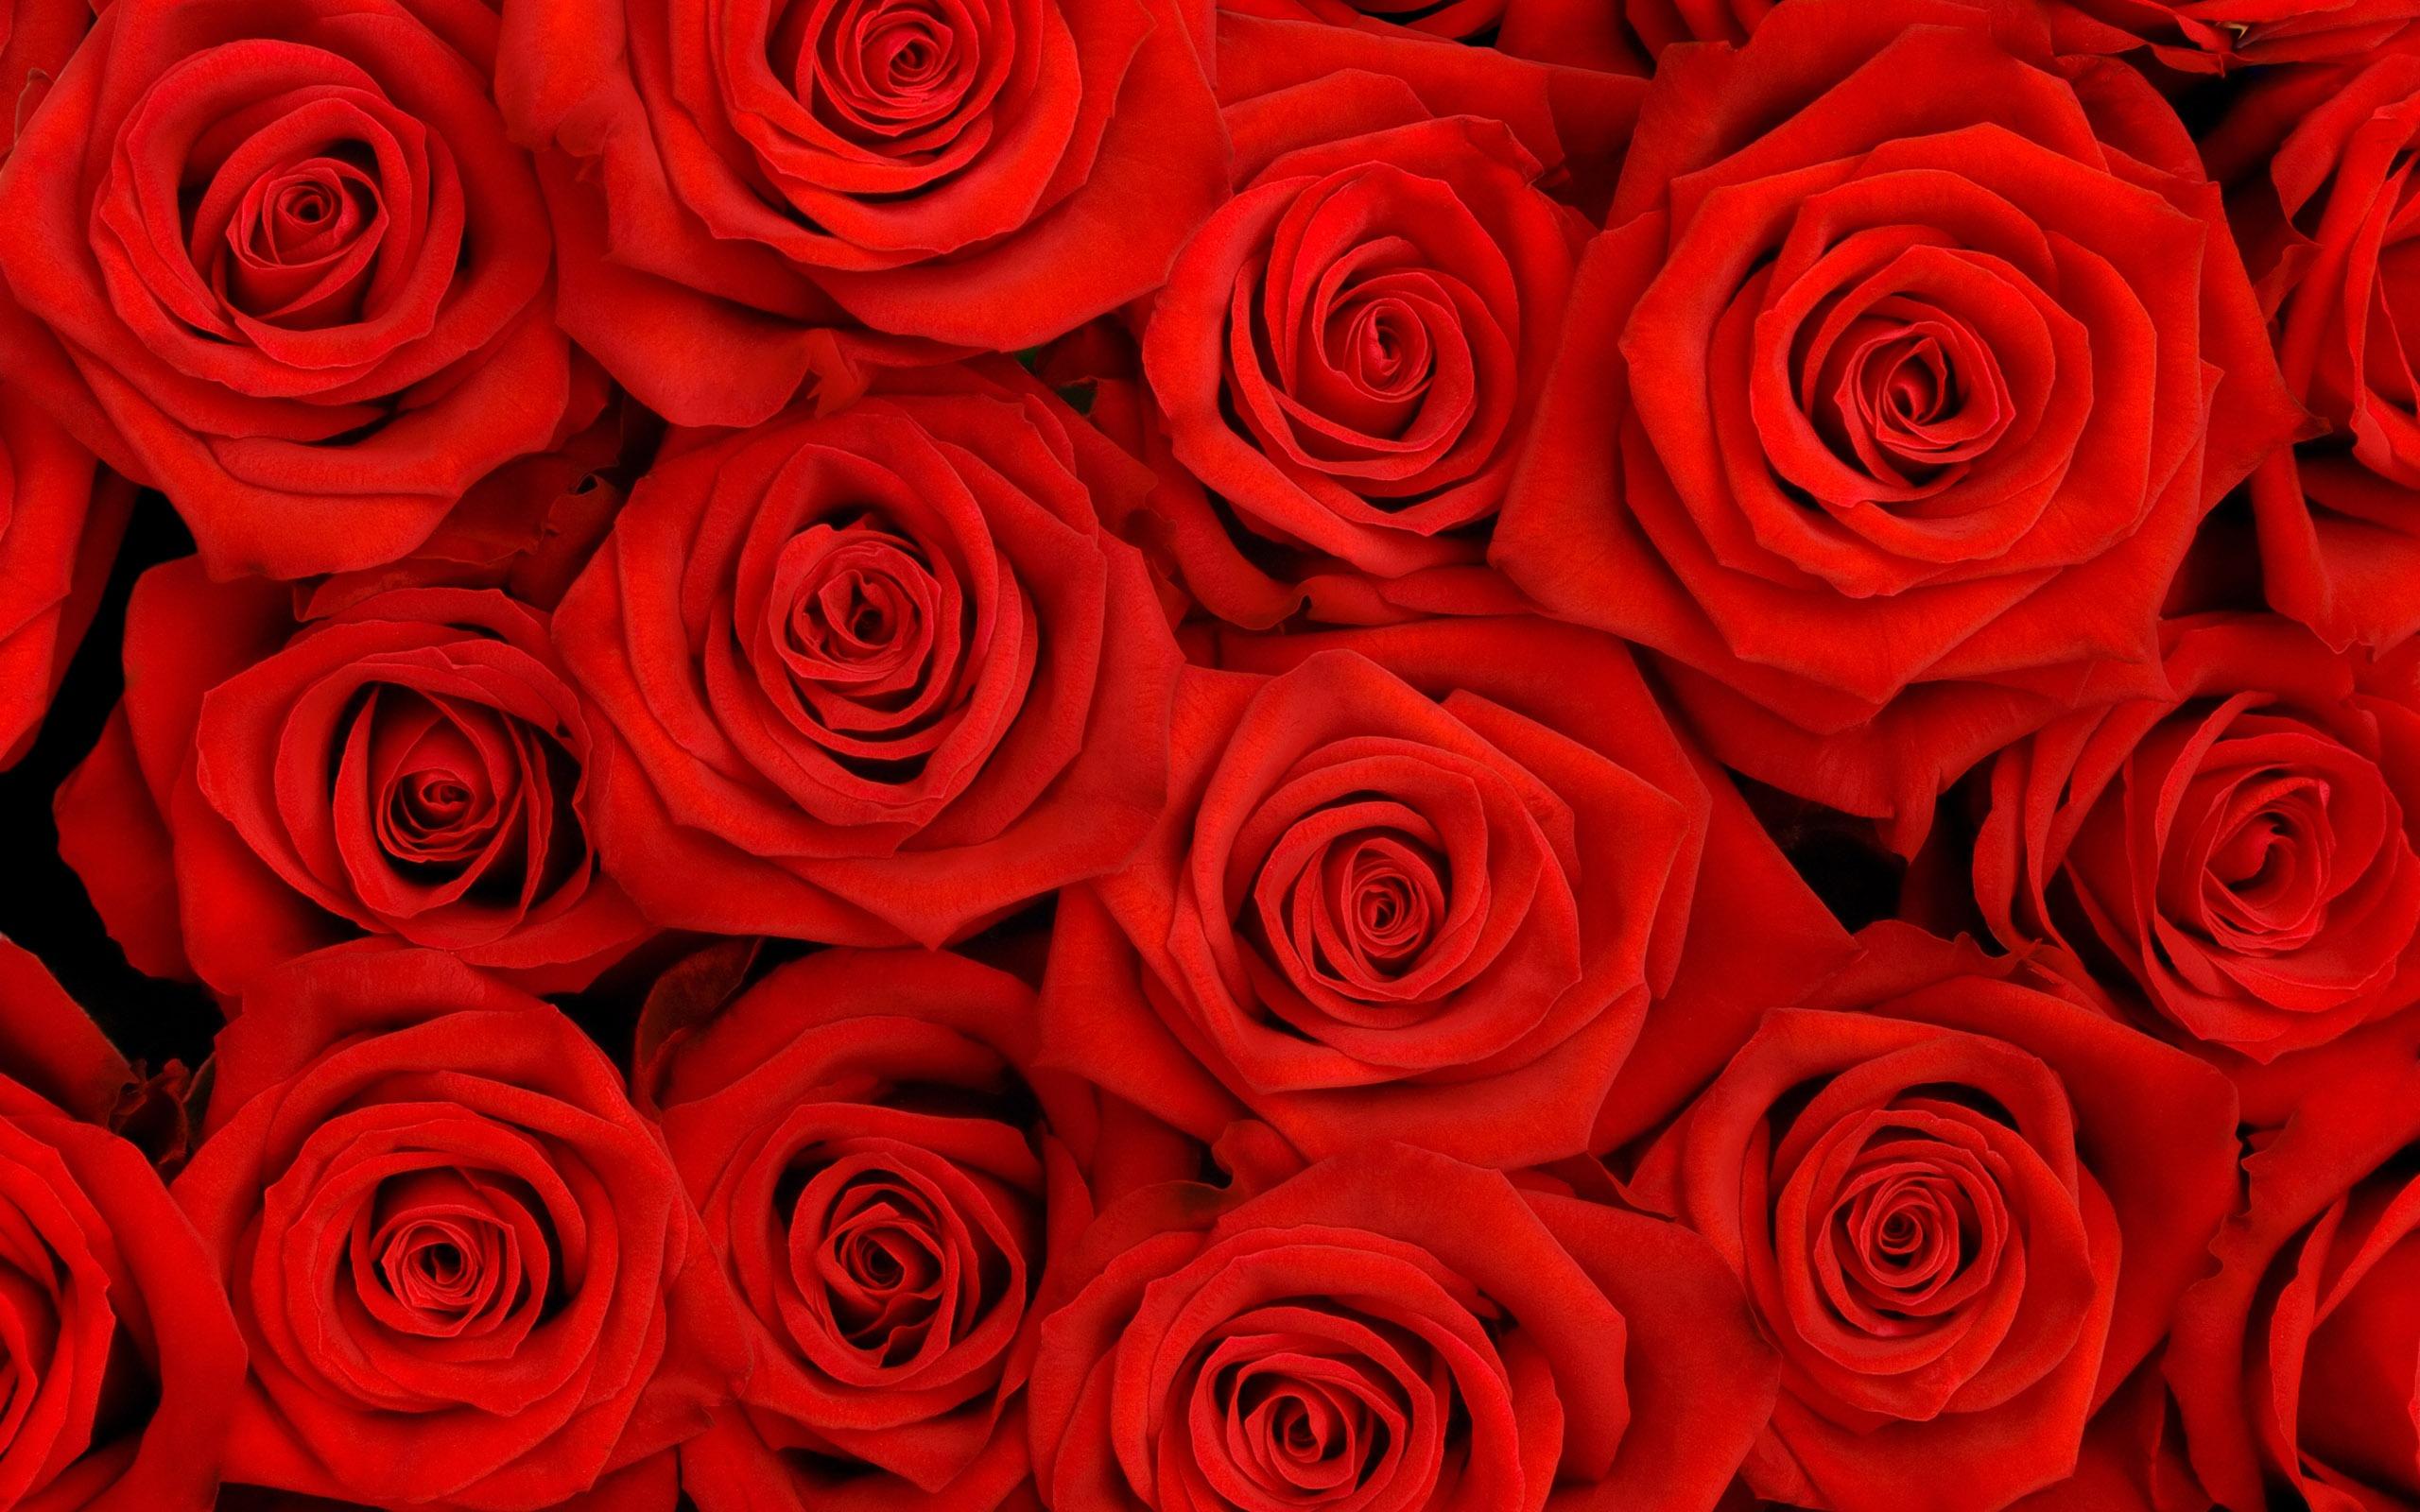 Love Roses Wallpaper For Free Download About 369